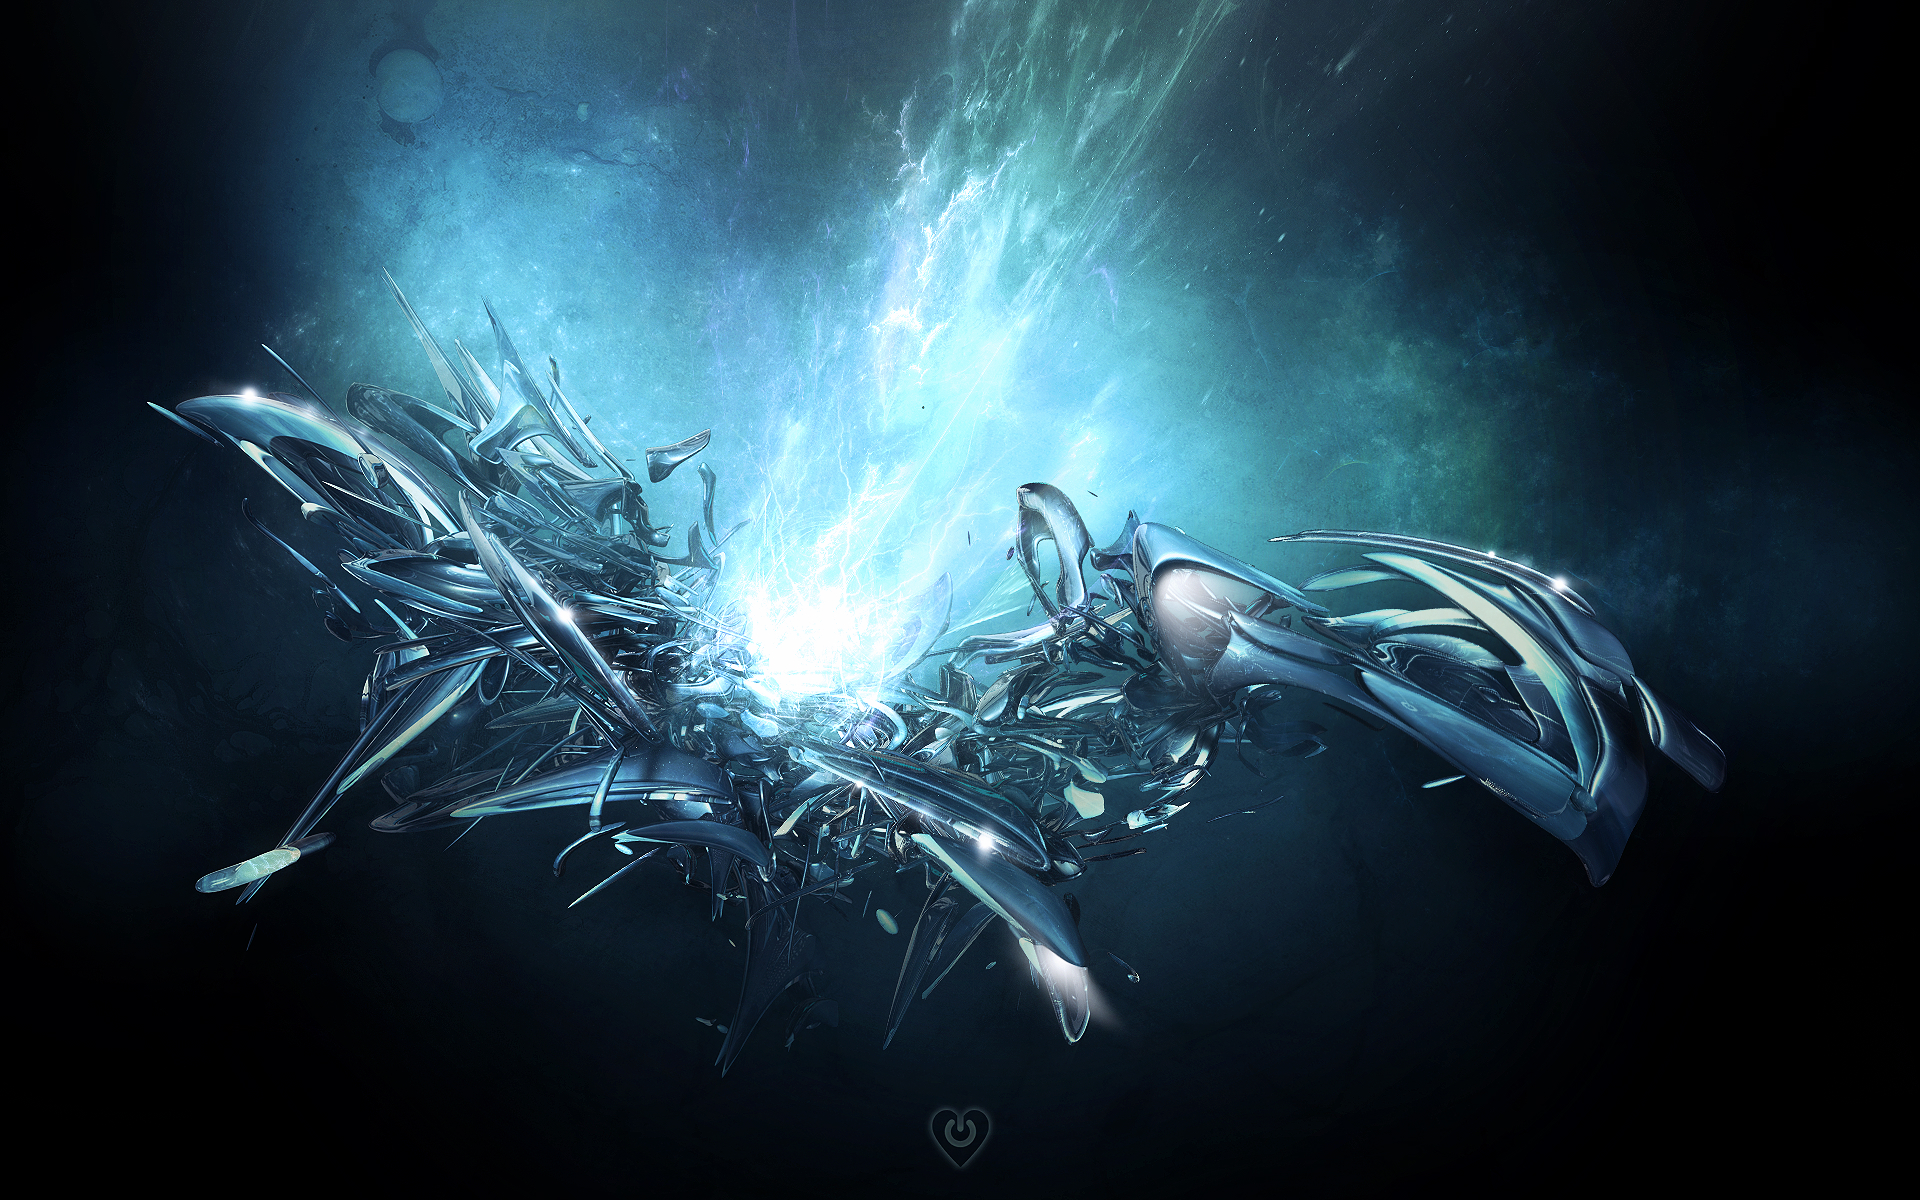 214 Digital Art HD Wallpapers | Backgrounds - Wallpaper Abyss - Page 2